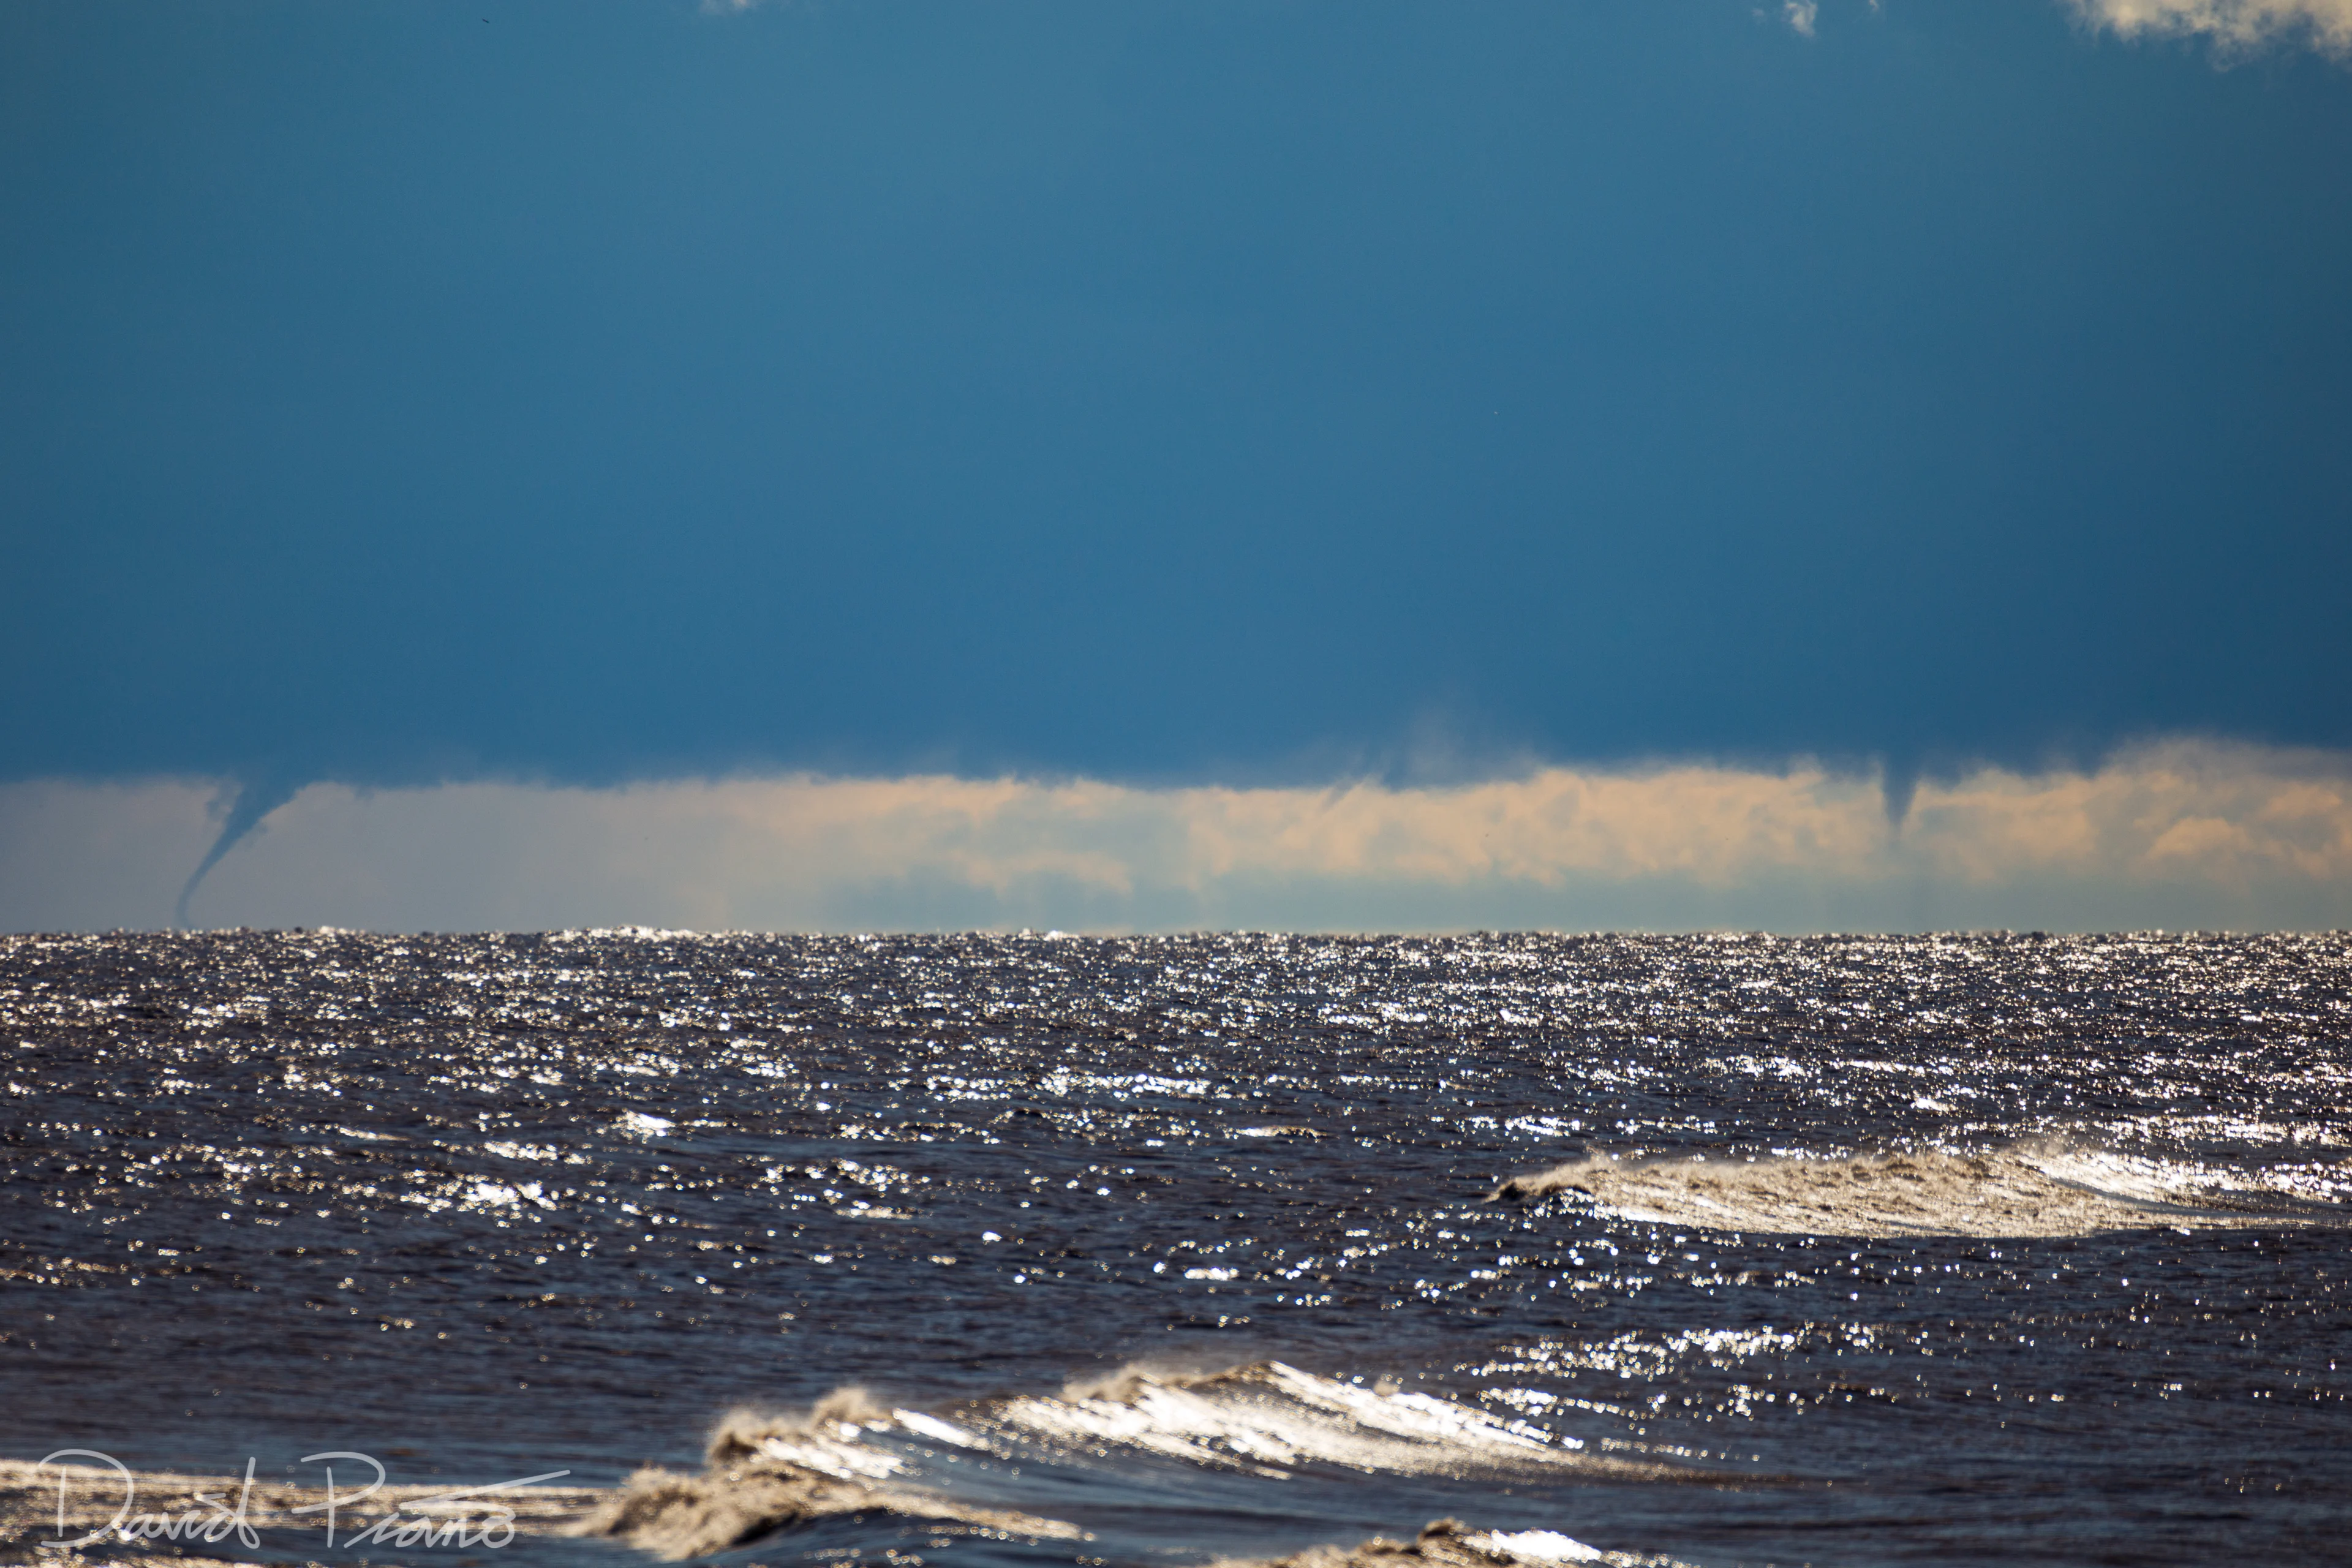 Mark Robinson: Lake Erie waterspout, Oct. 3, 2020 3